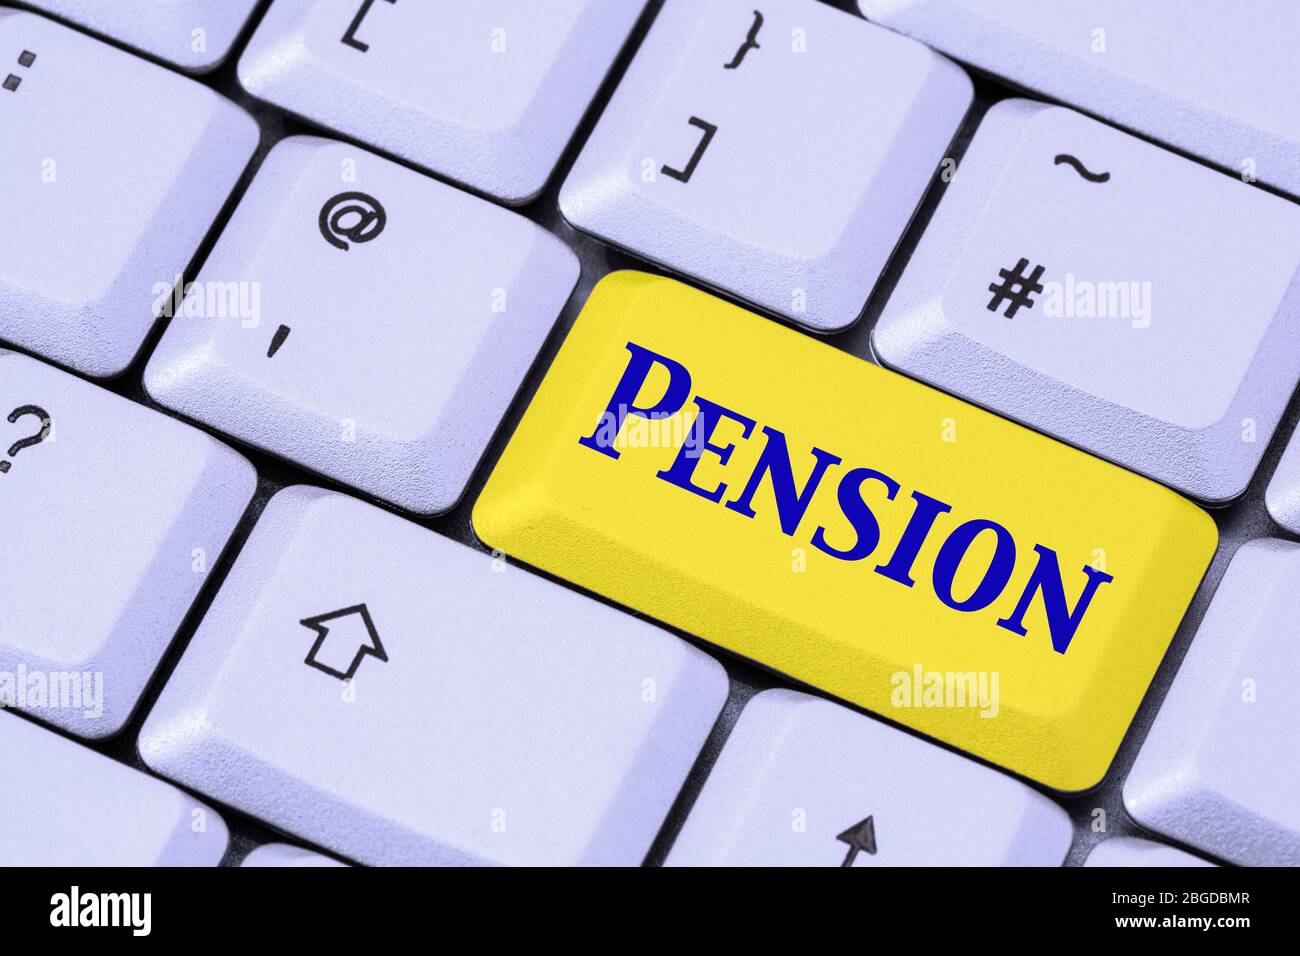 A keyboard with the word PENSION in blue lettering on a yellow enter key. Business and retirement concept. England, UK, Britain Stock Photo